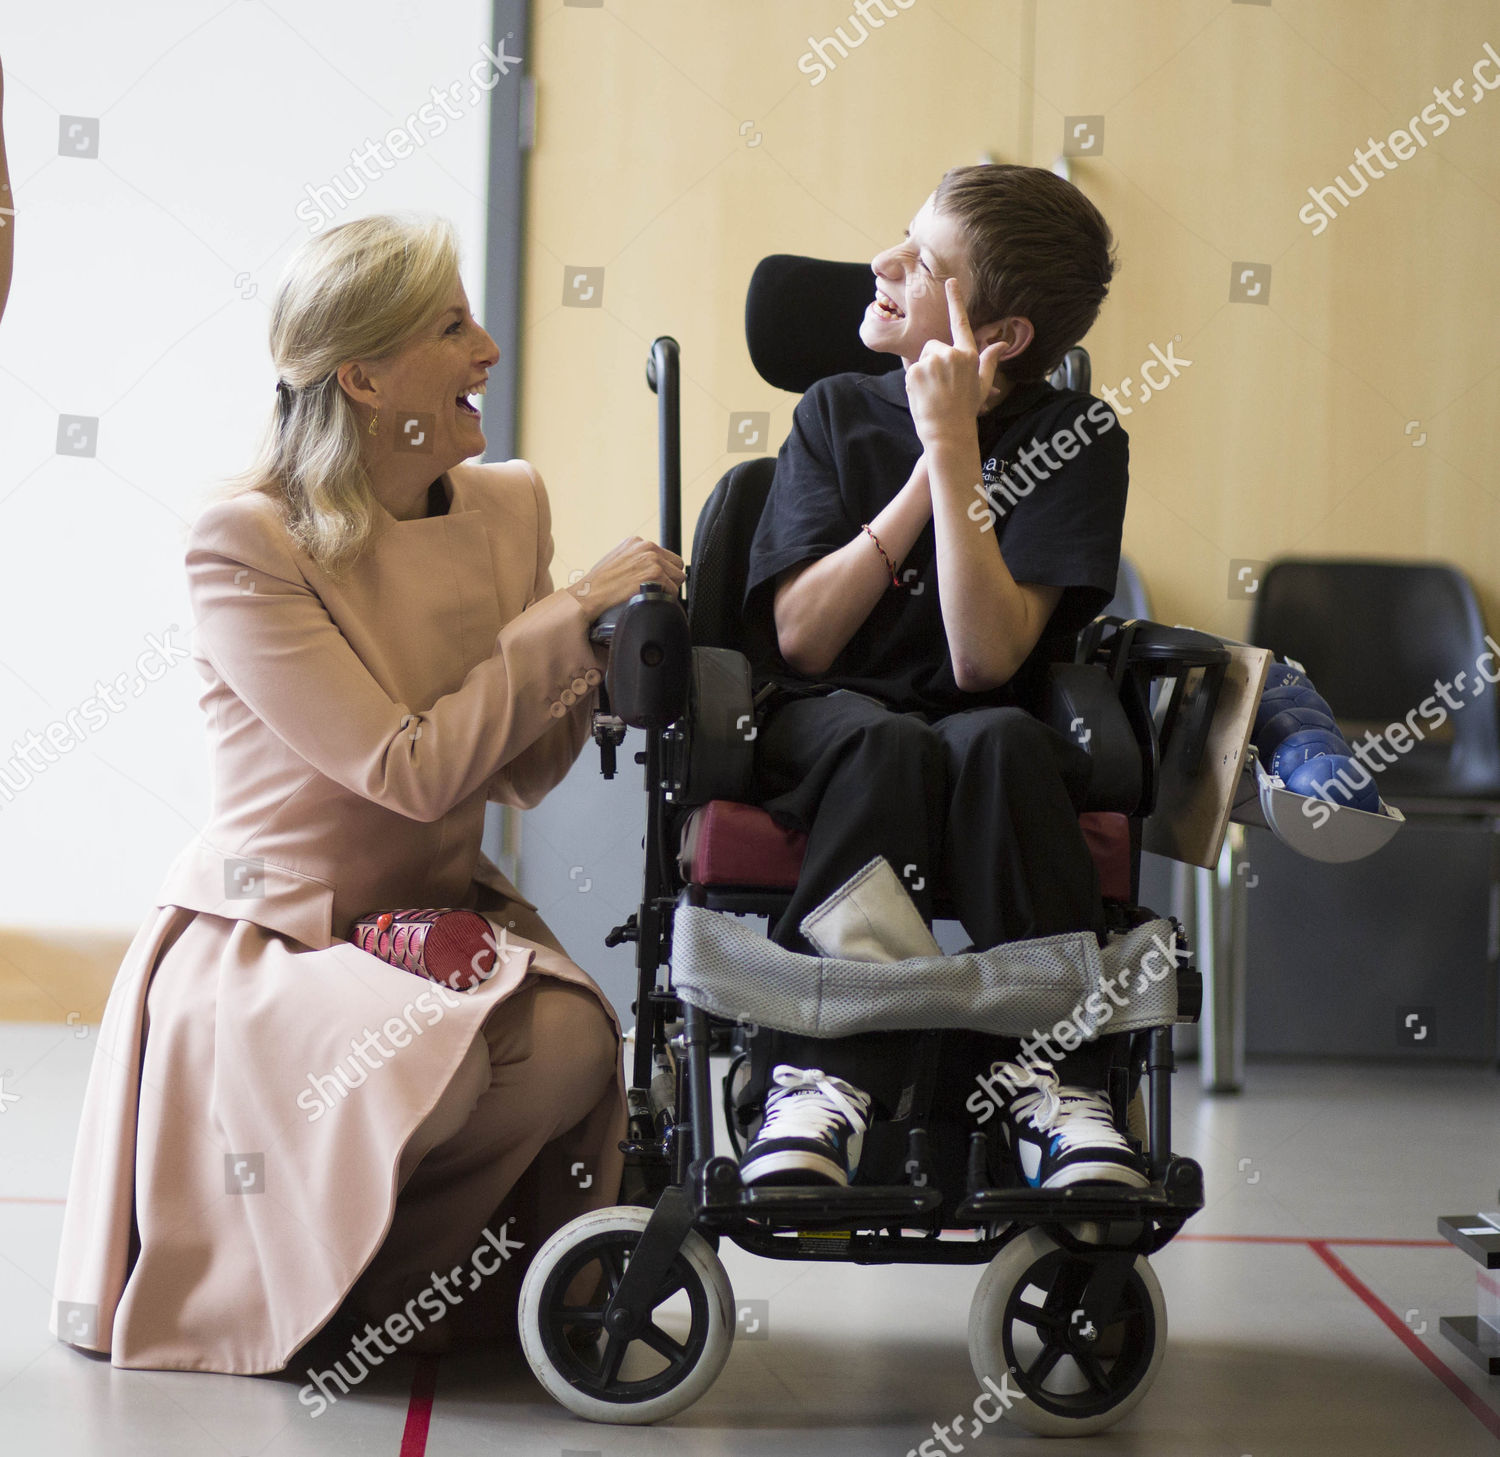 sophie-countess-of-wessex-visits-treloars-college-hampshire-britain-shutterstock-editorial-3787952ab.jpg